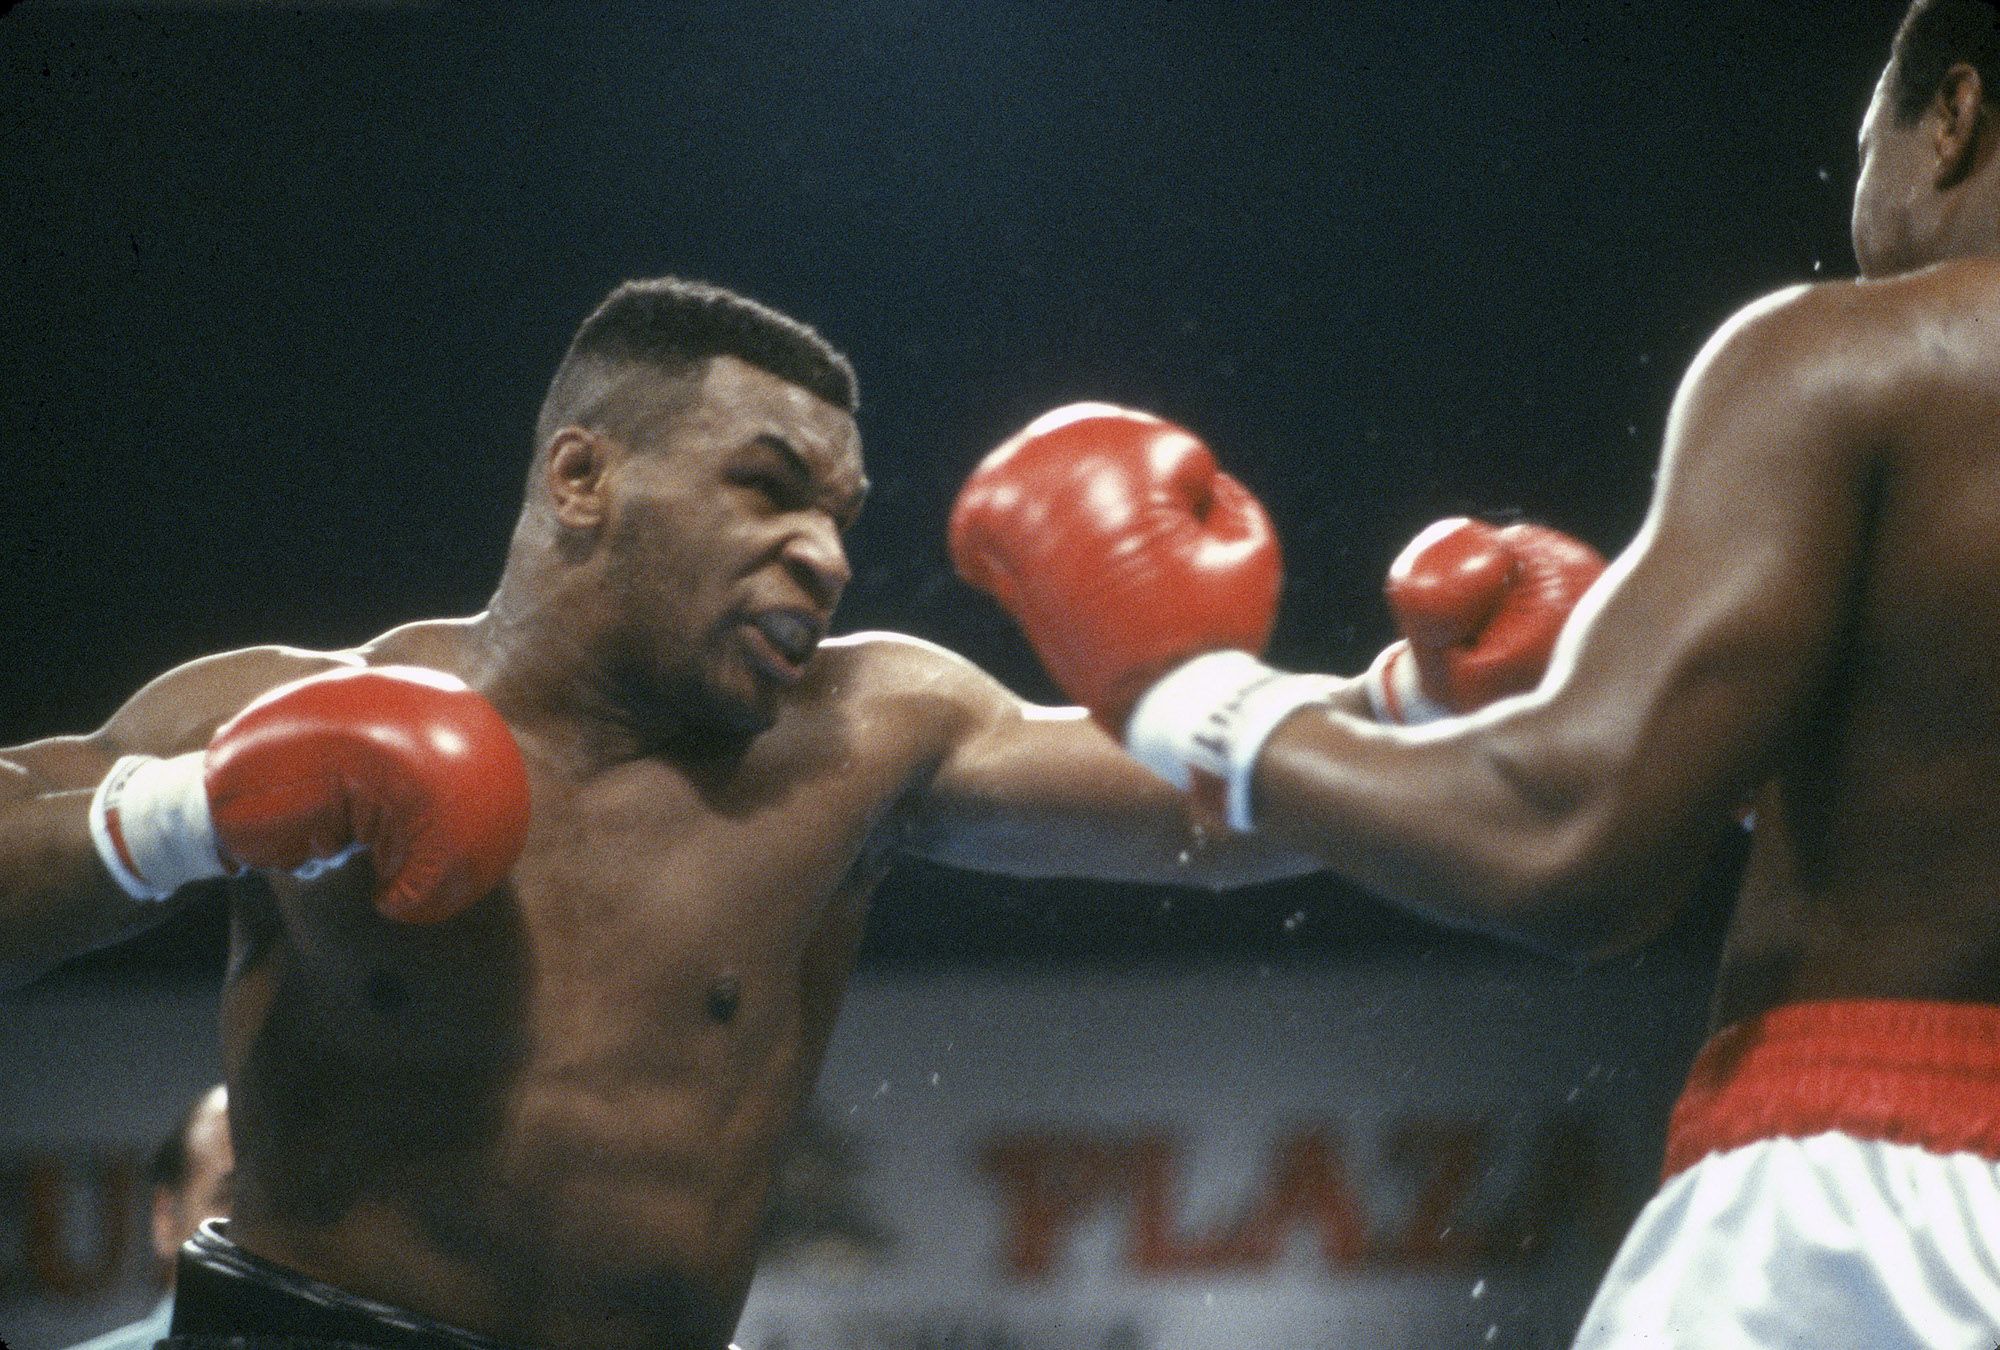 Mike Tyson says that the man he punched on the plane &quot;got lucky&quot;